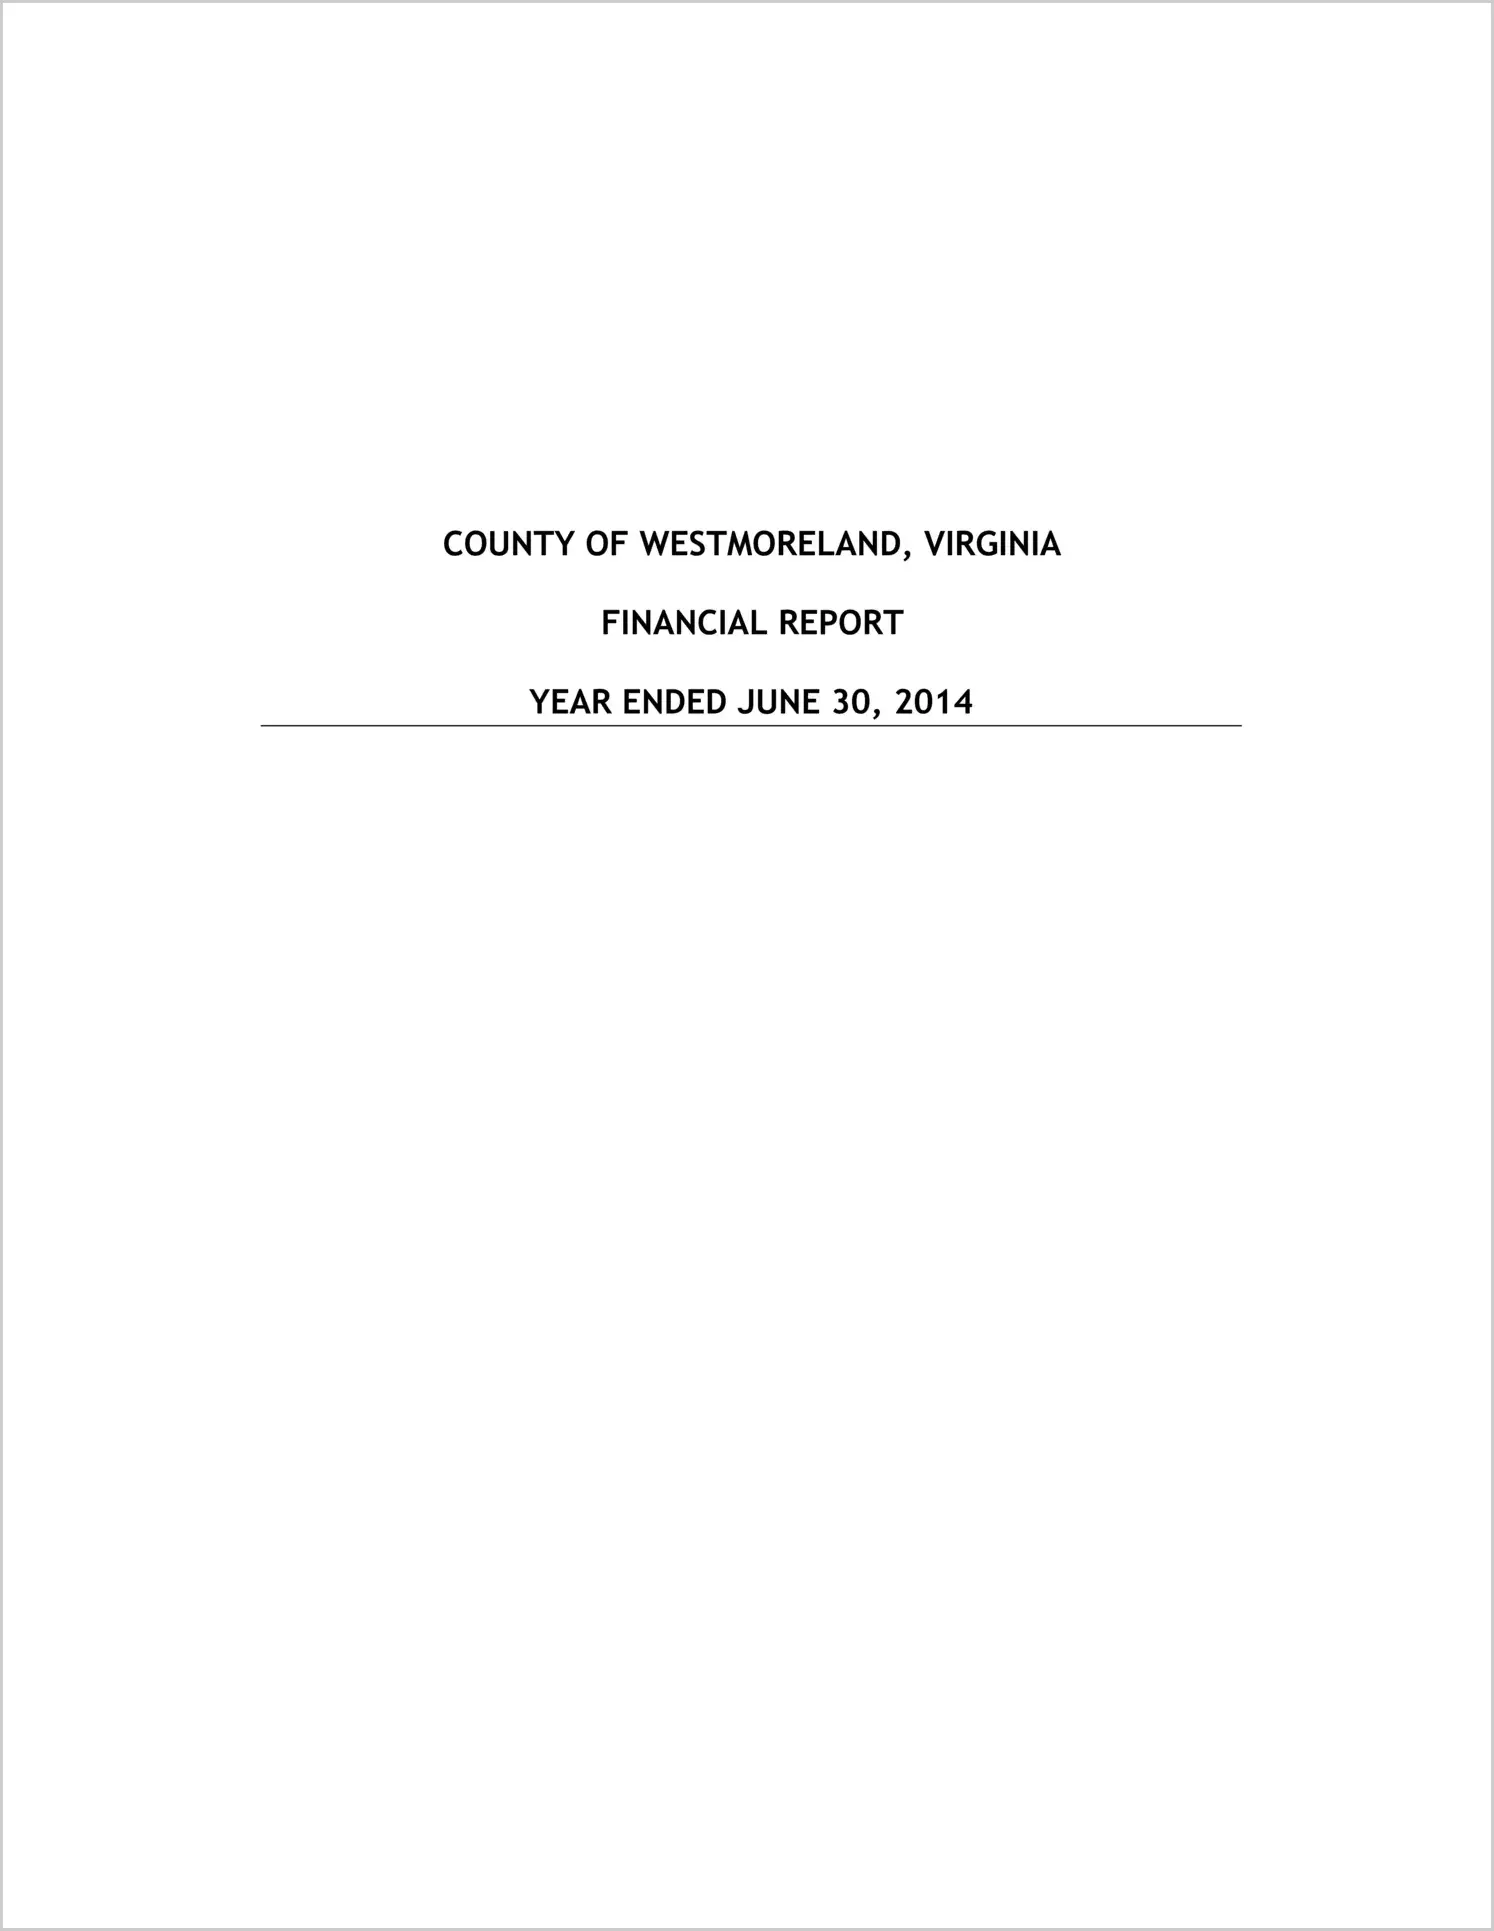 2014 Annual Financial Report for County of Westmoreland